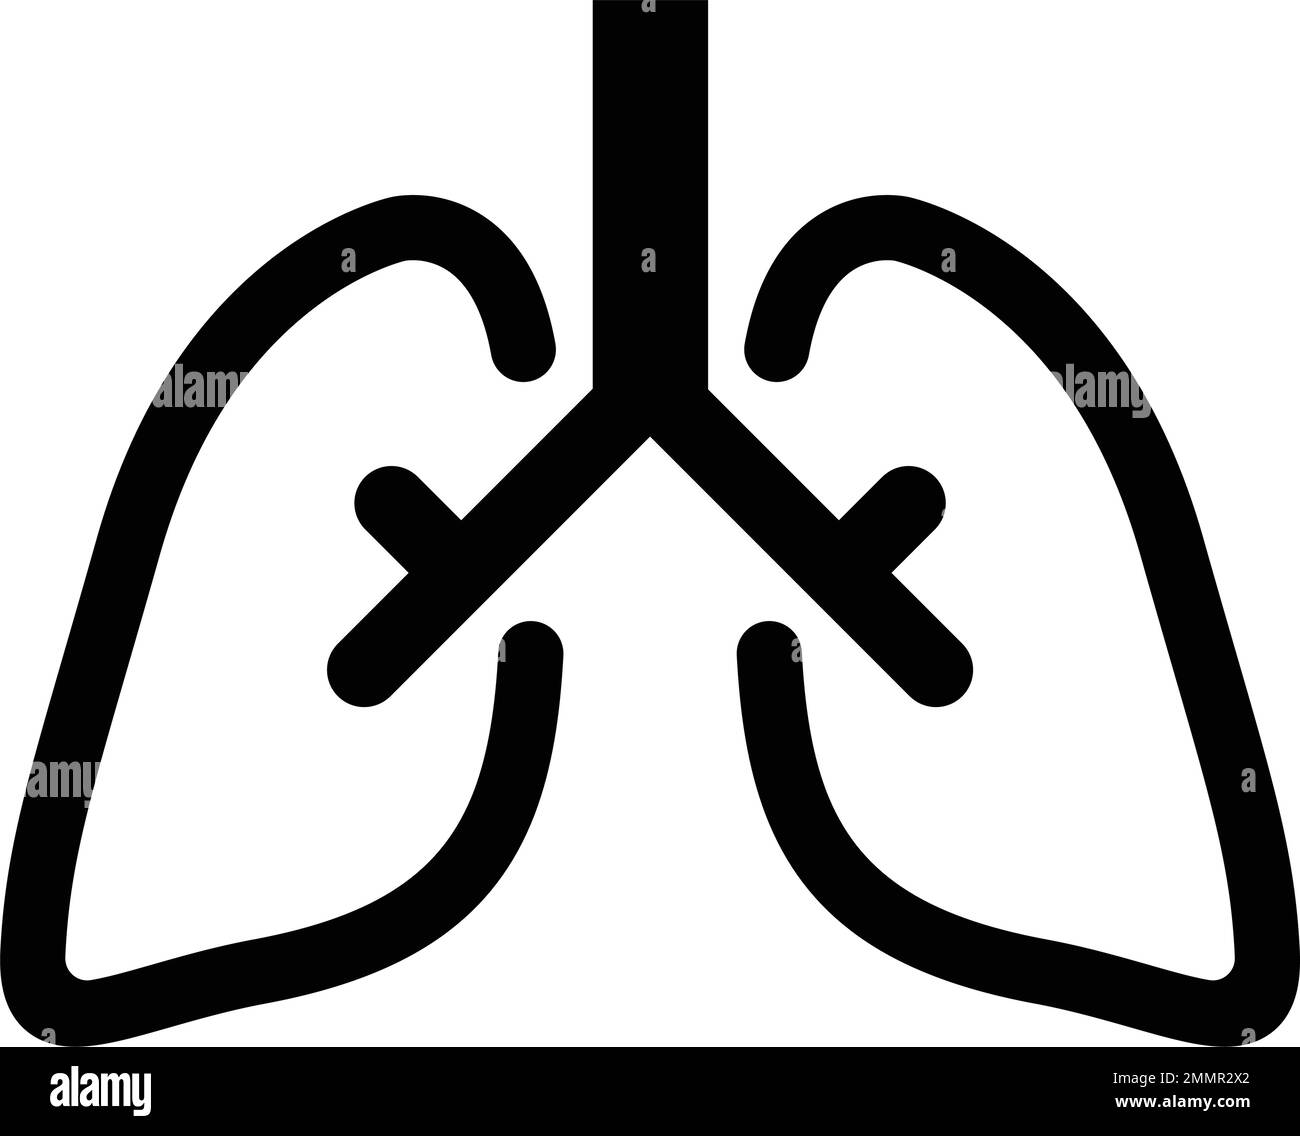 lungs icon stock illustration design Stock Vector